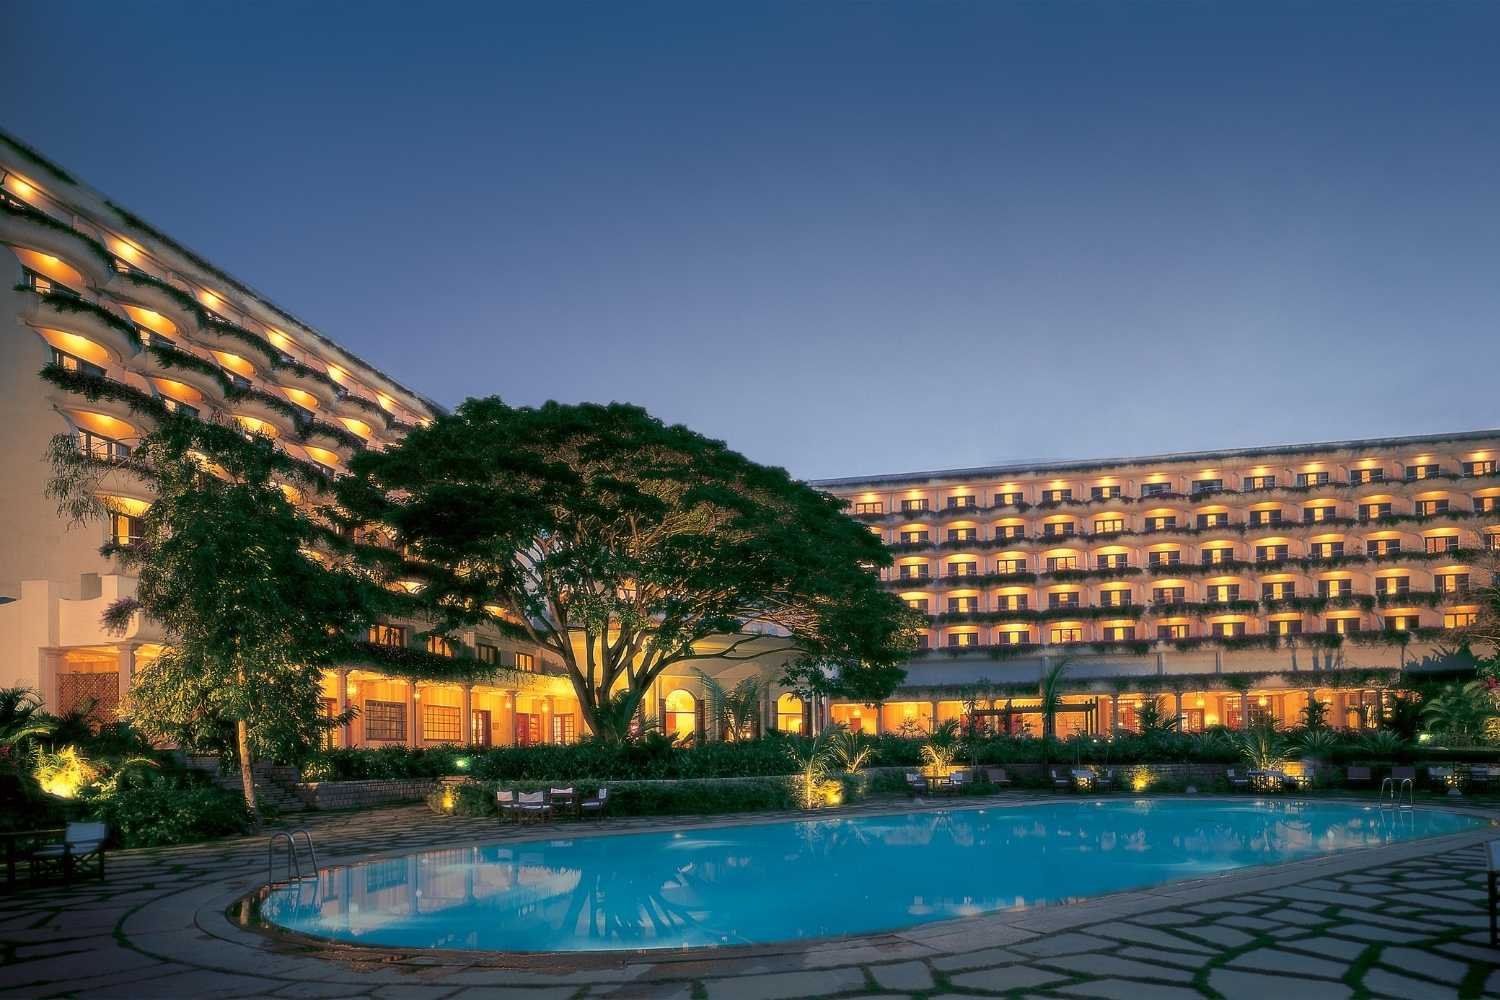 The Oberoi, one of the finest wedding hotels in Bangalore